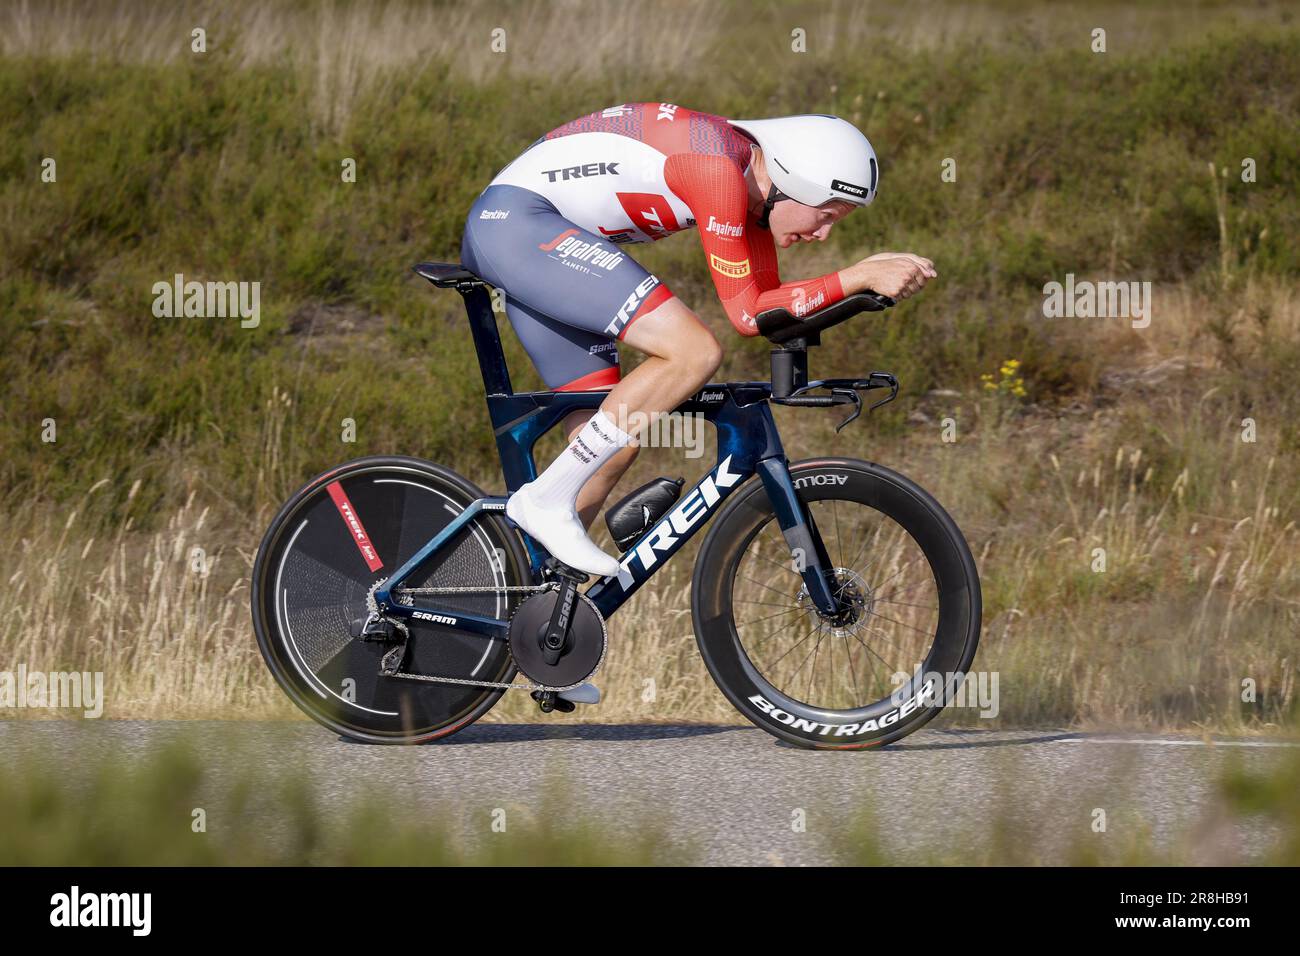 ELSPEET - Cyclist Daan Hoole during the Dutch time trial championship. The riders rode two laps of approximately 20 kilometers between the meadows and forest paths of the Veluwe. ANP BAS CZERWINSKI Stock Photo